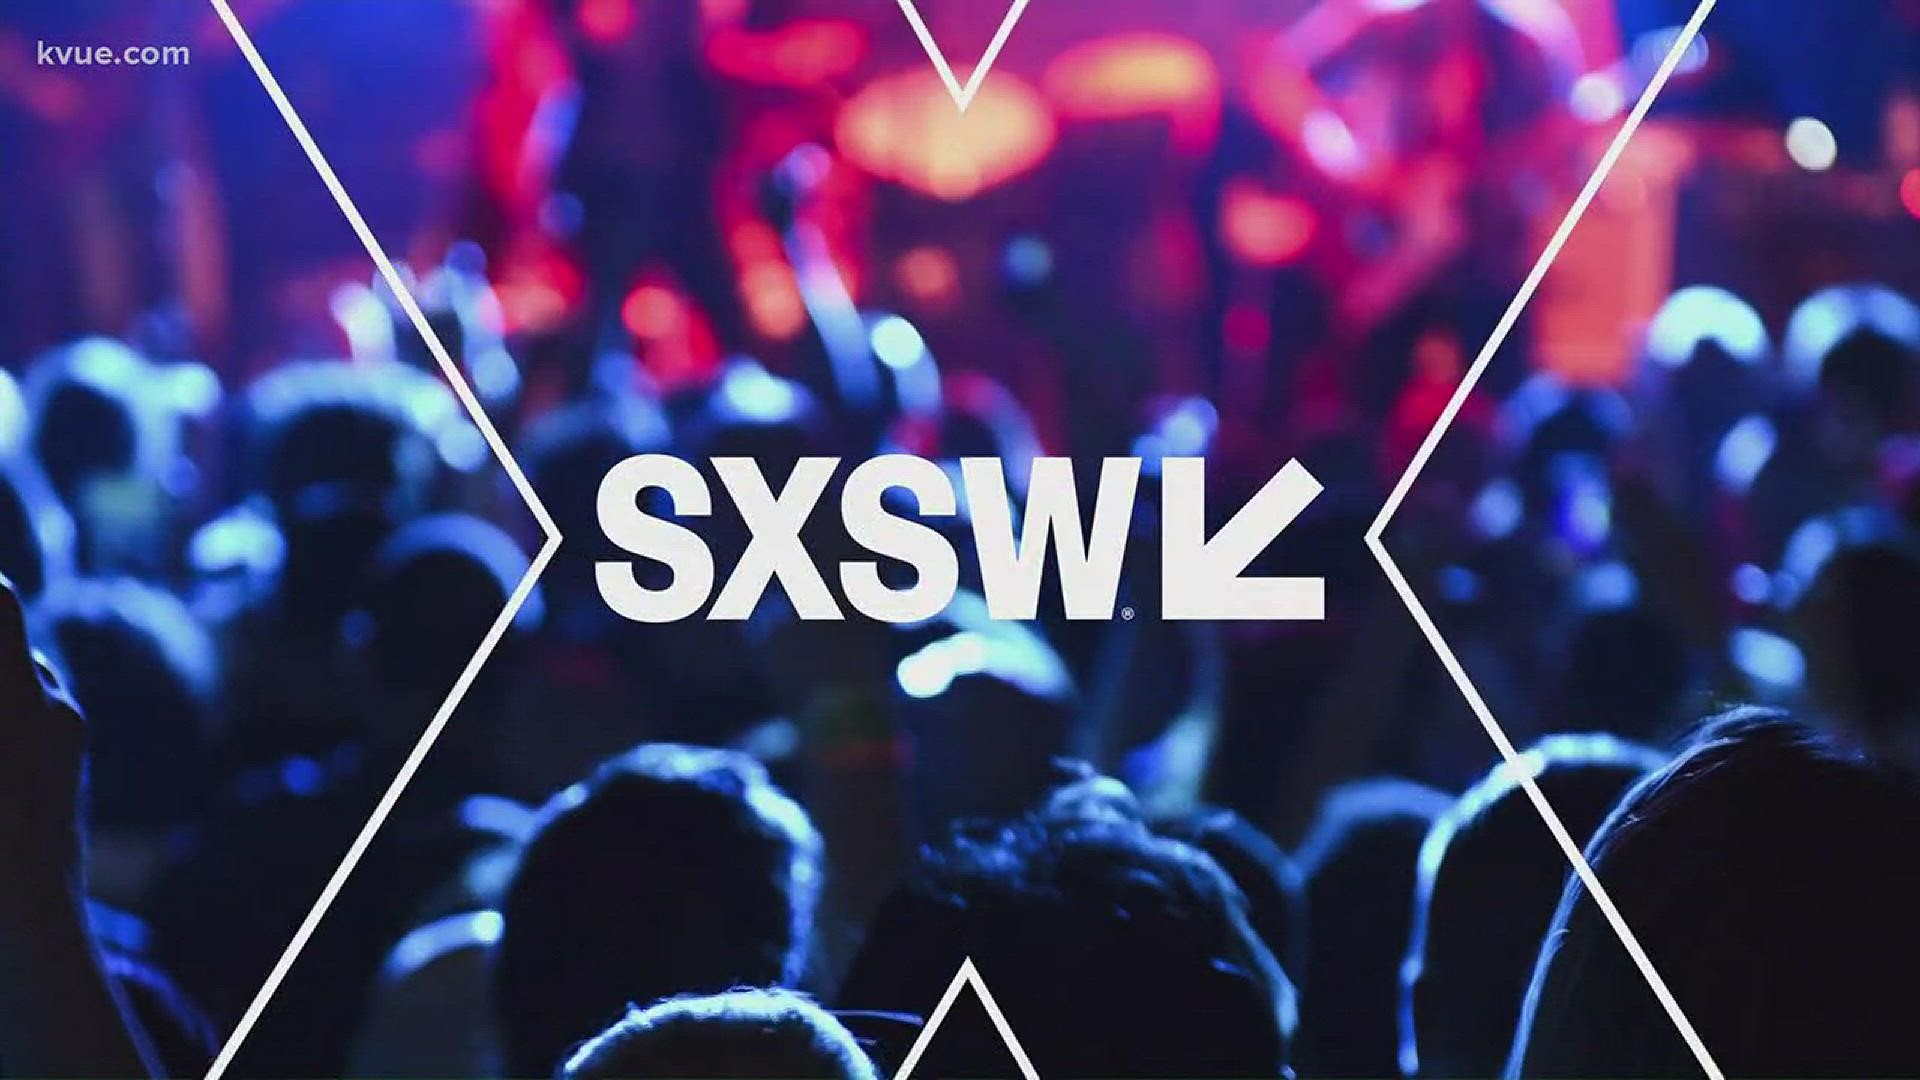 KVUE got a preview of WestWorld's fan experience at SXSW.